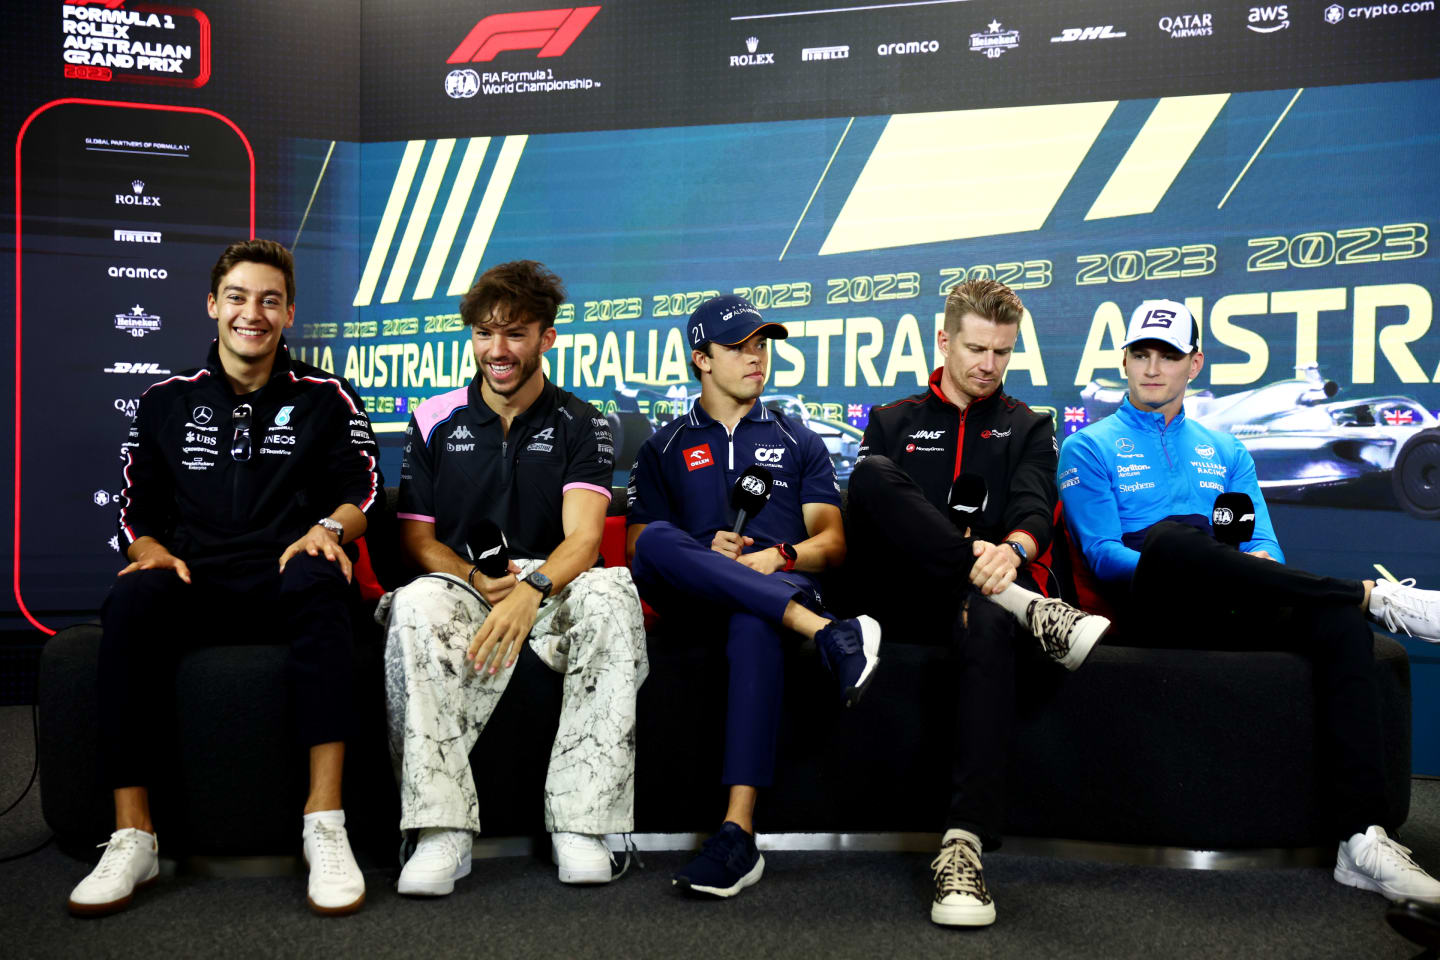 MELBOURNE, AUSTRALIA - MARCH 30: George Russell of Great Britain and Mercedes, Pierre Gasly of France and Alpine F1, Nyck de Vries of Netherlands and Scuderia AlphaTauri, Nico Hulkenberg of Germany and Haas F1 and Logan Sargeant of United States and Williams attend the Drivers Press Conference during previews ahead of the F1 Grand Prix of Australia at Albert Park Grand Prix Circuit on March 30, 2023 in Melbourne, Australia. (Photo by Dan Istitene/Getty Images)